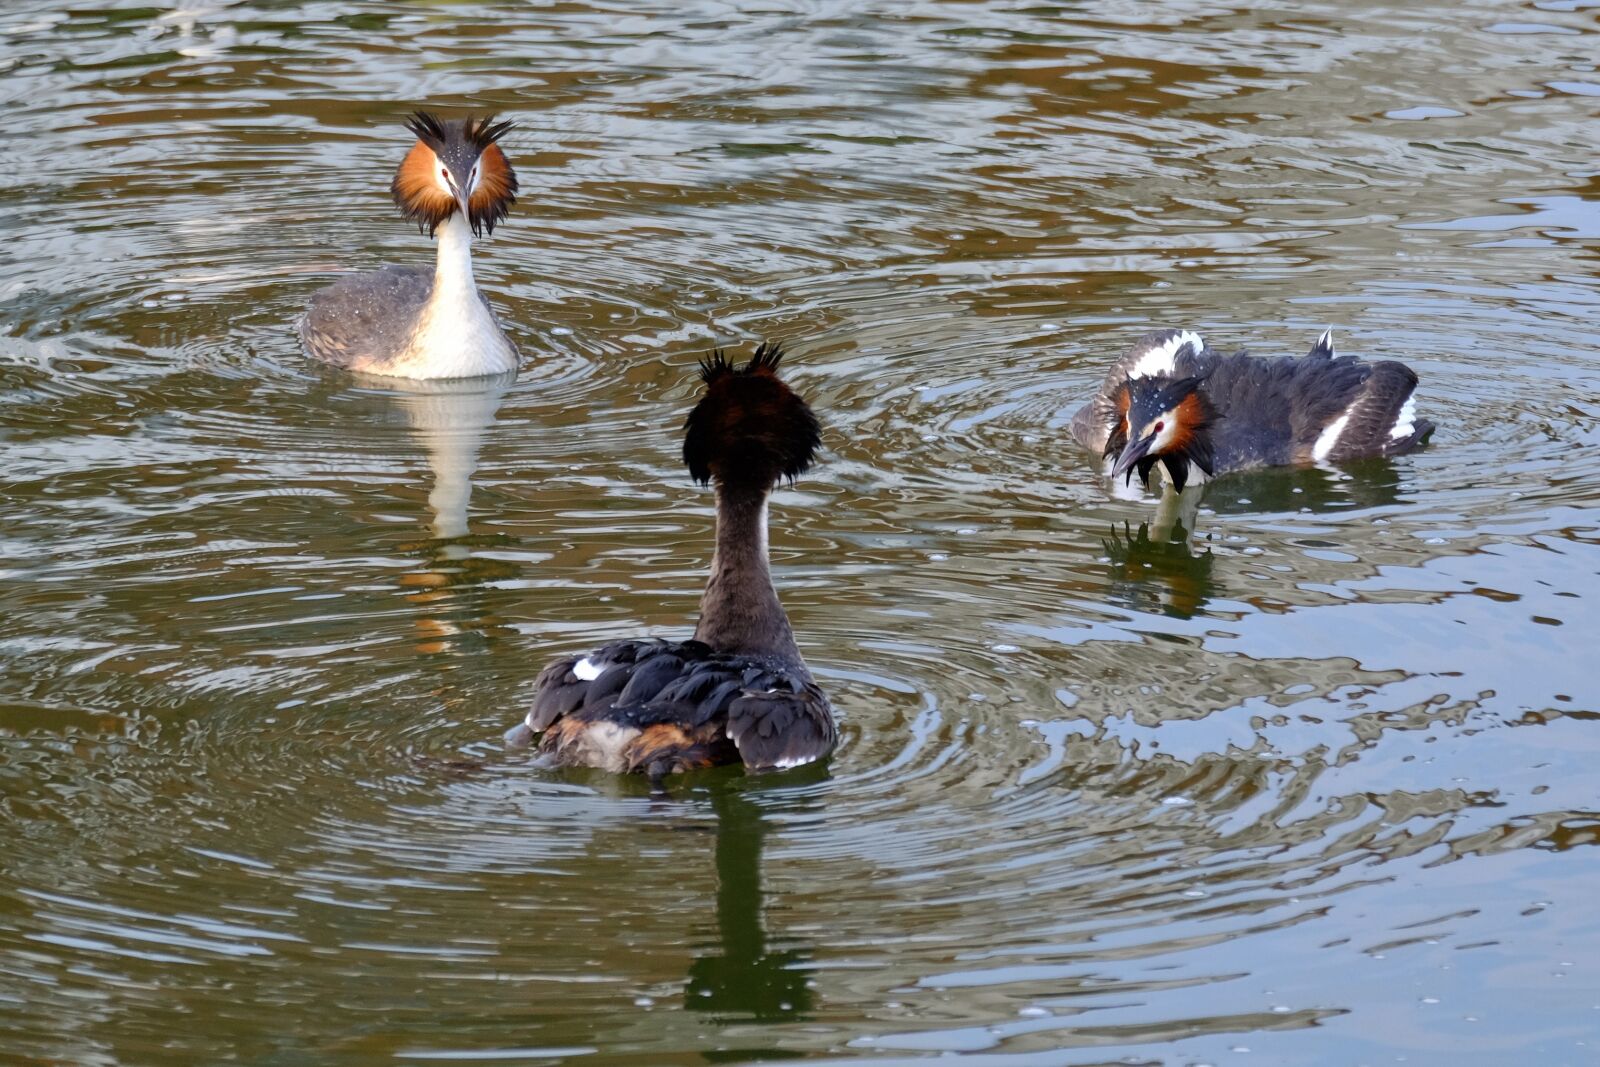 Fujifilm X-T10 sample photo. Great crested grebe, water photography